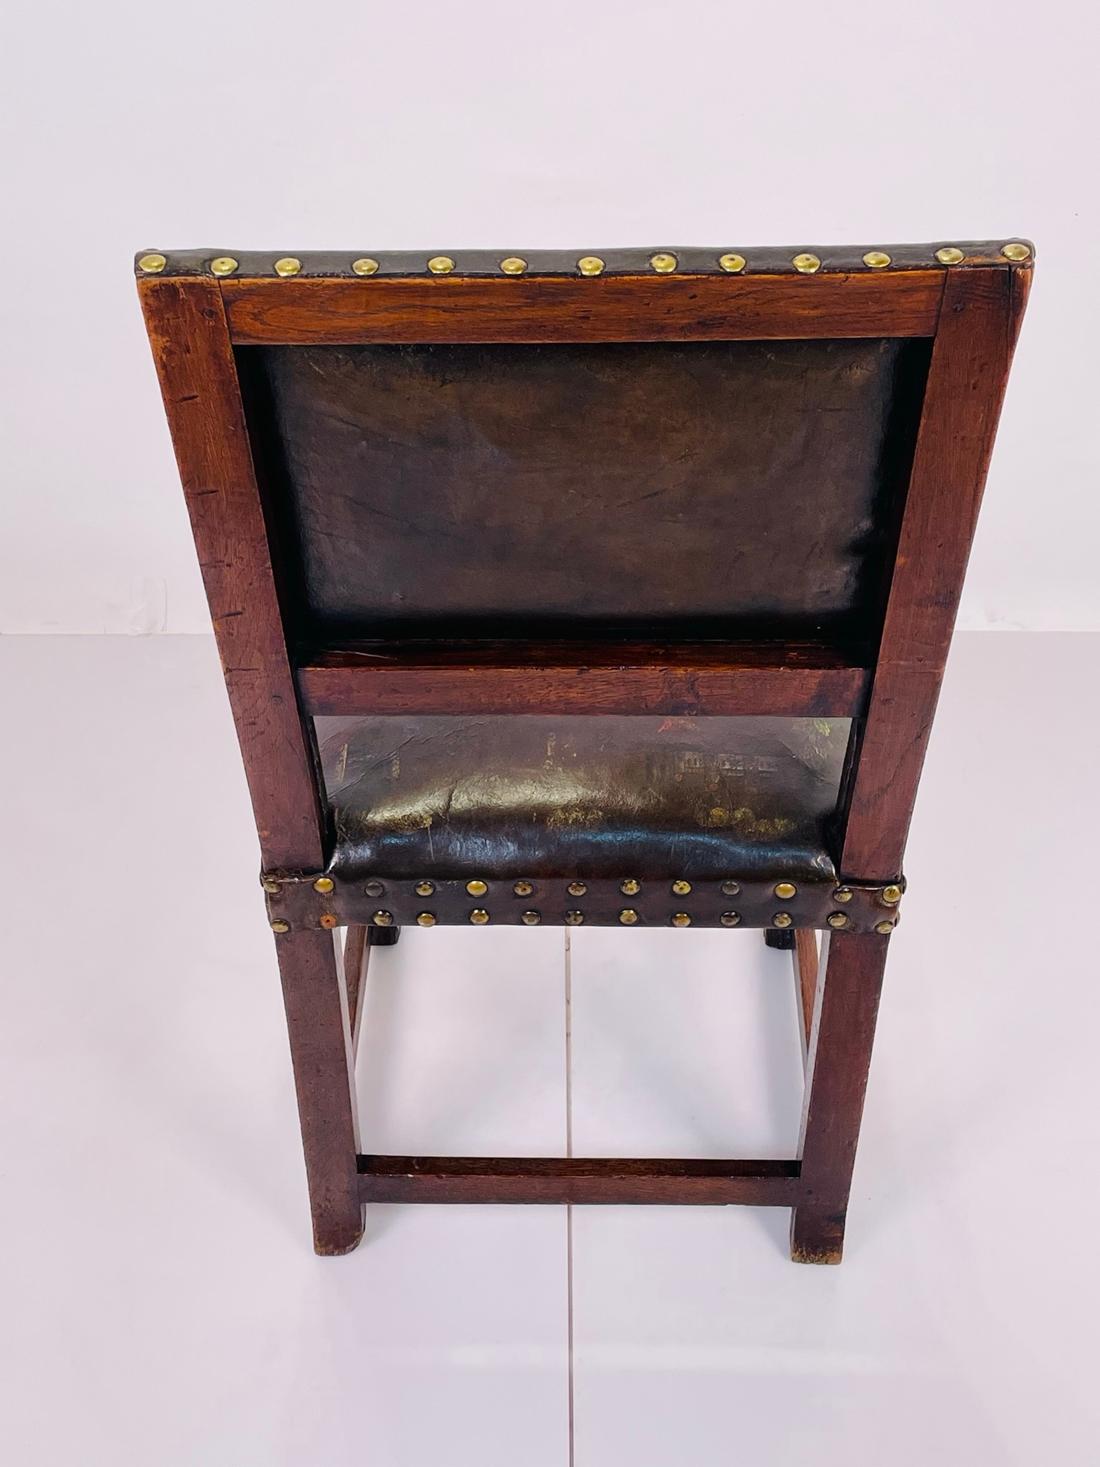 Antique Leather & Wood Chair With Painting on Seat & Backrest, Made in France 1